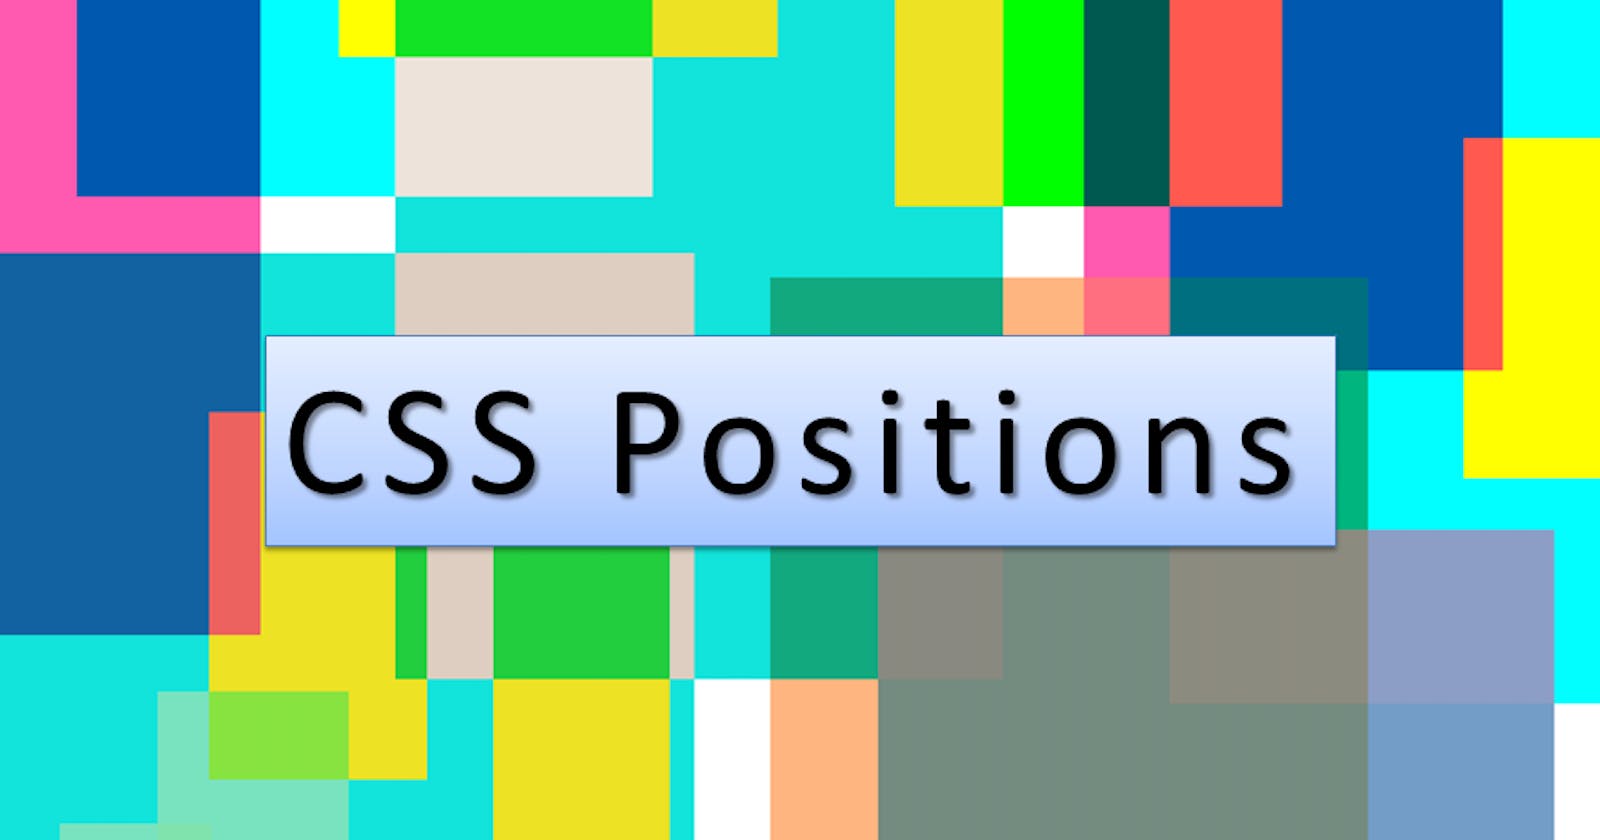 Positions of elements in CSS